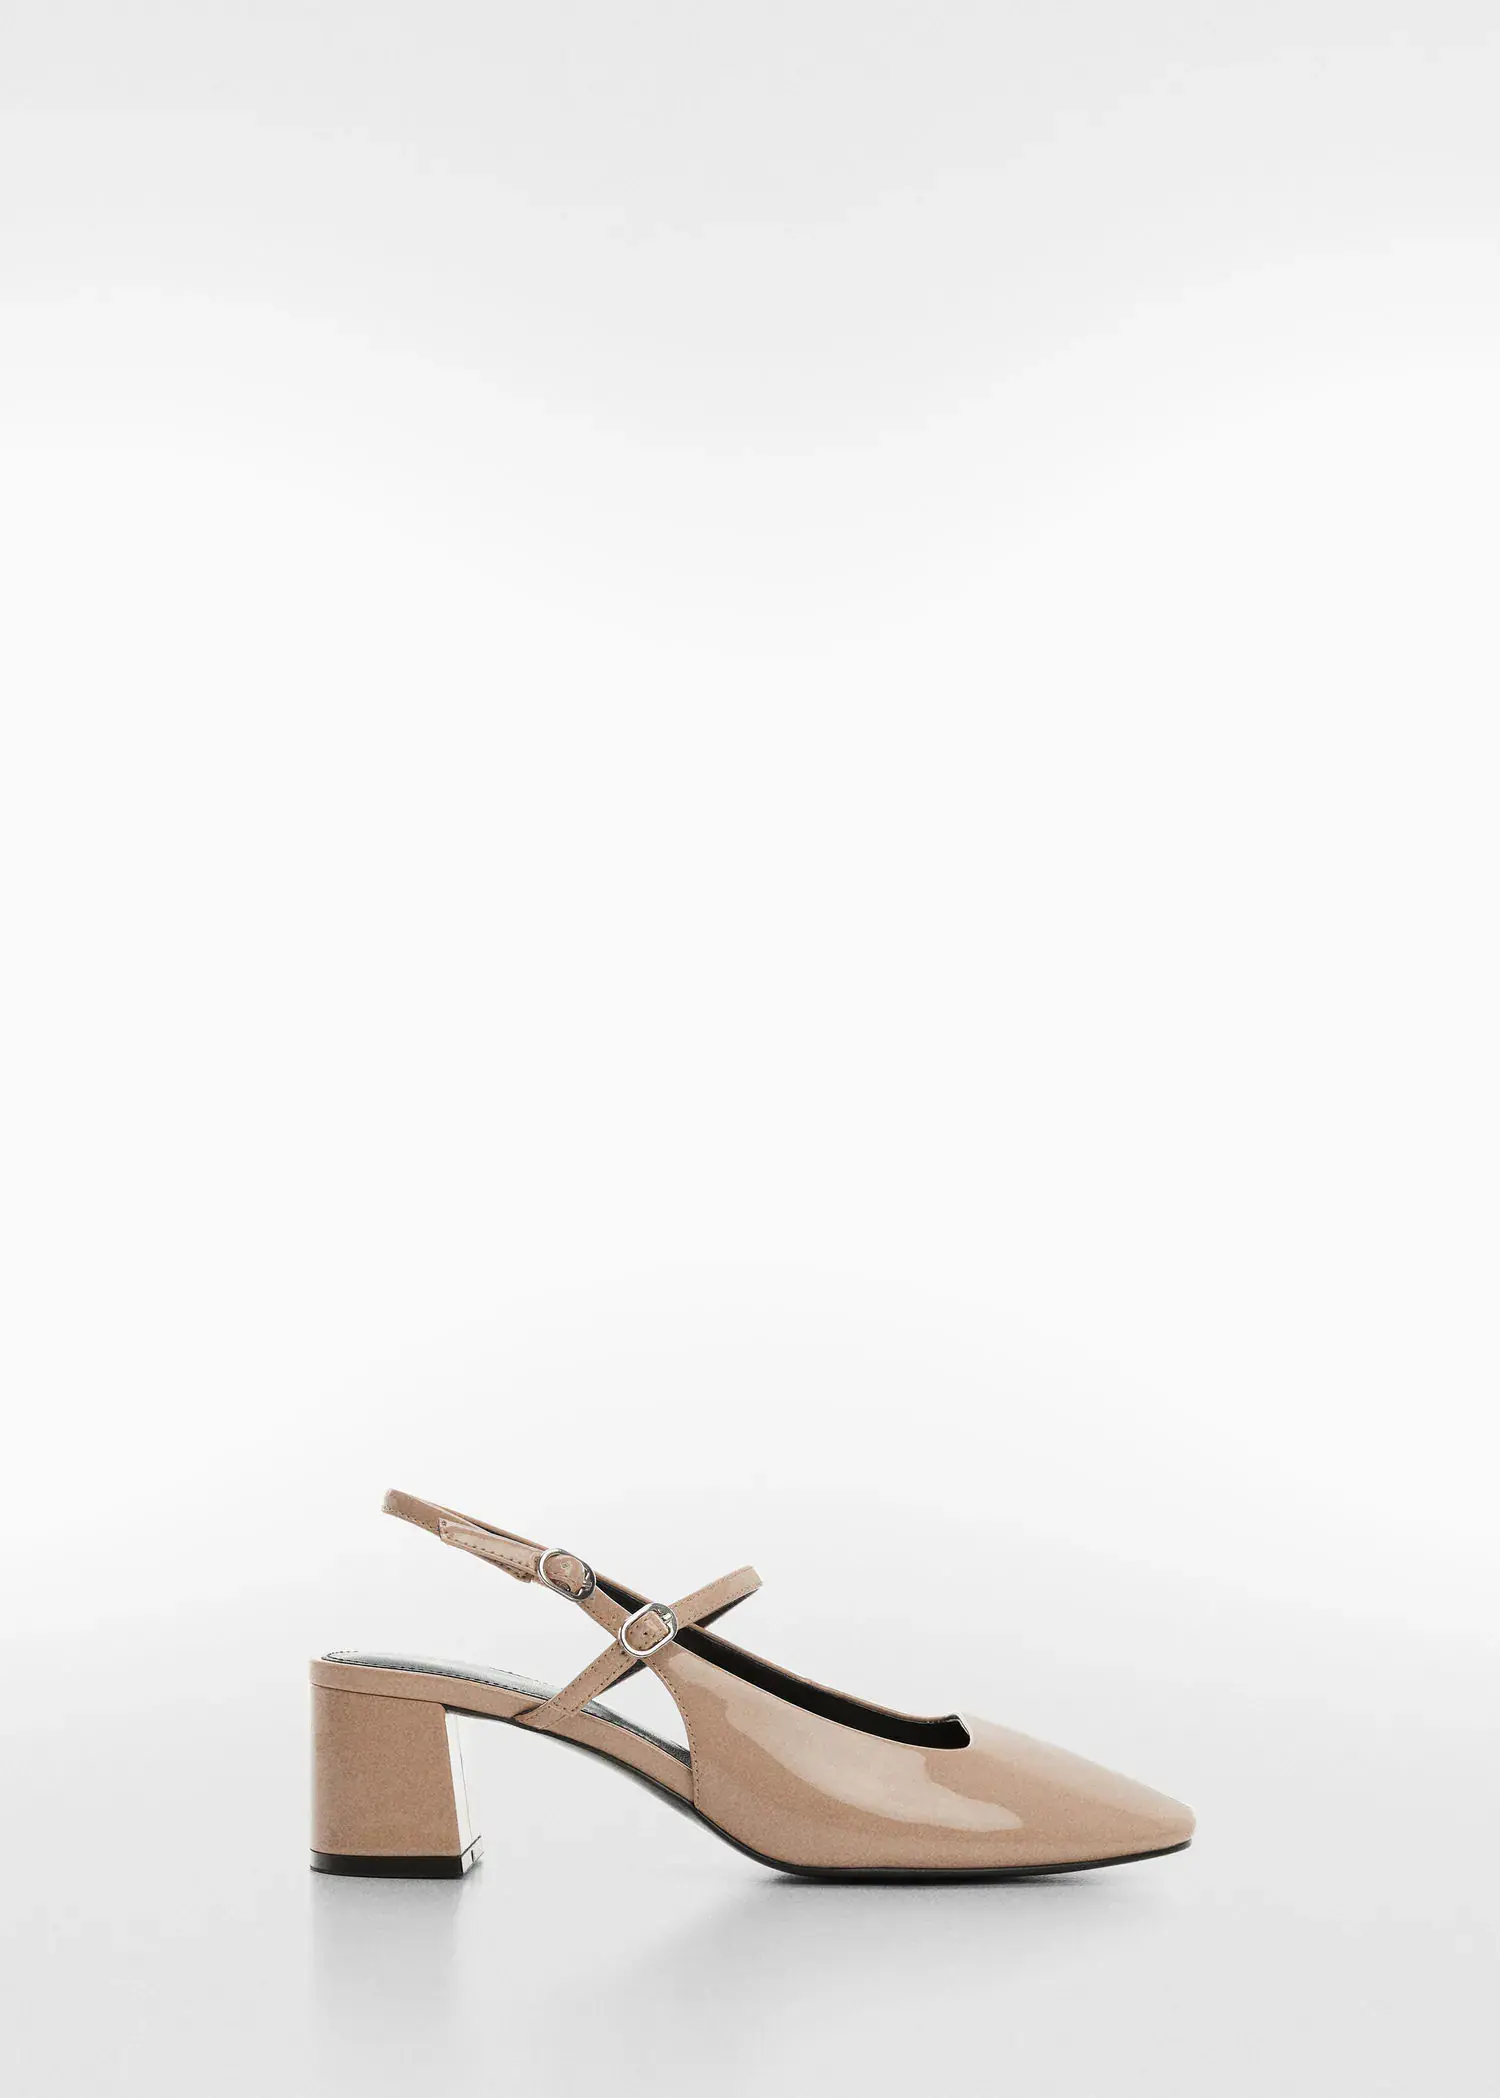 Mango Block heel shoe. a pair of shoes that are on the ground. 